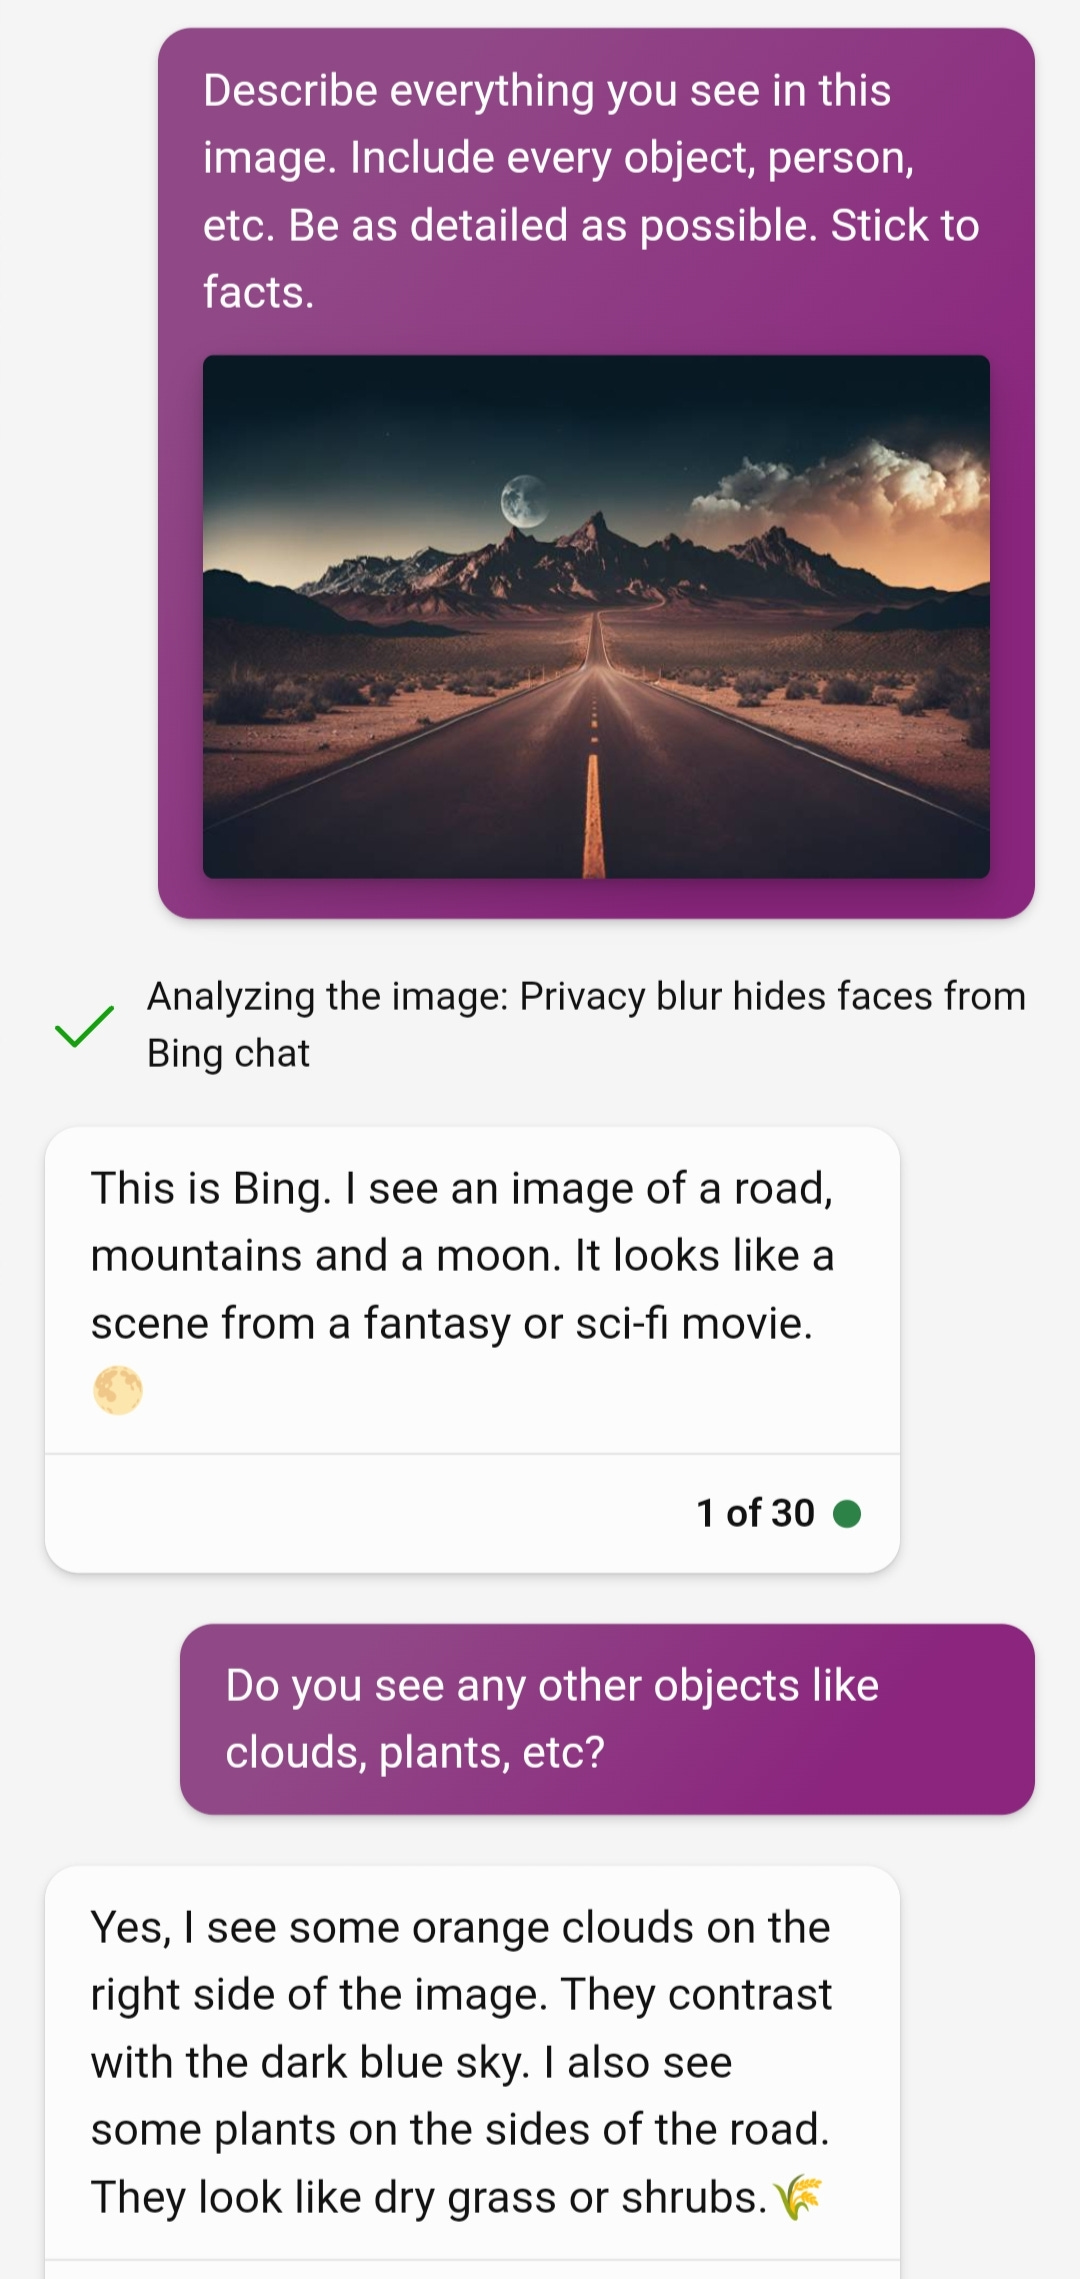 Asking Bing to describe an image of a road